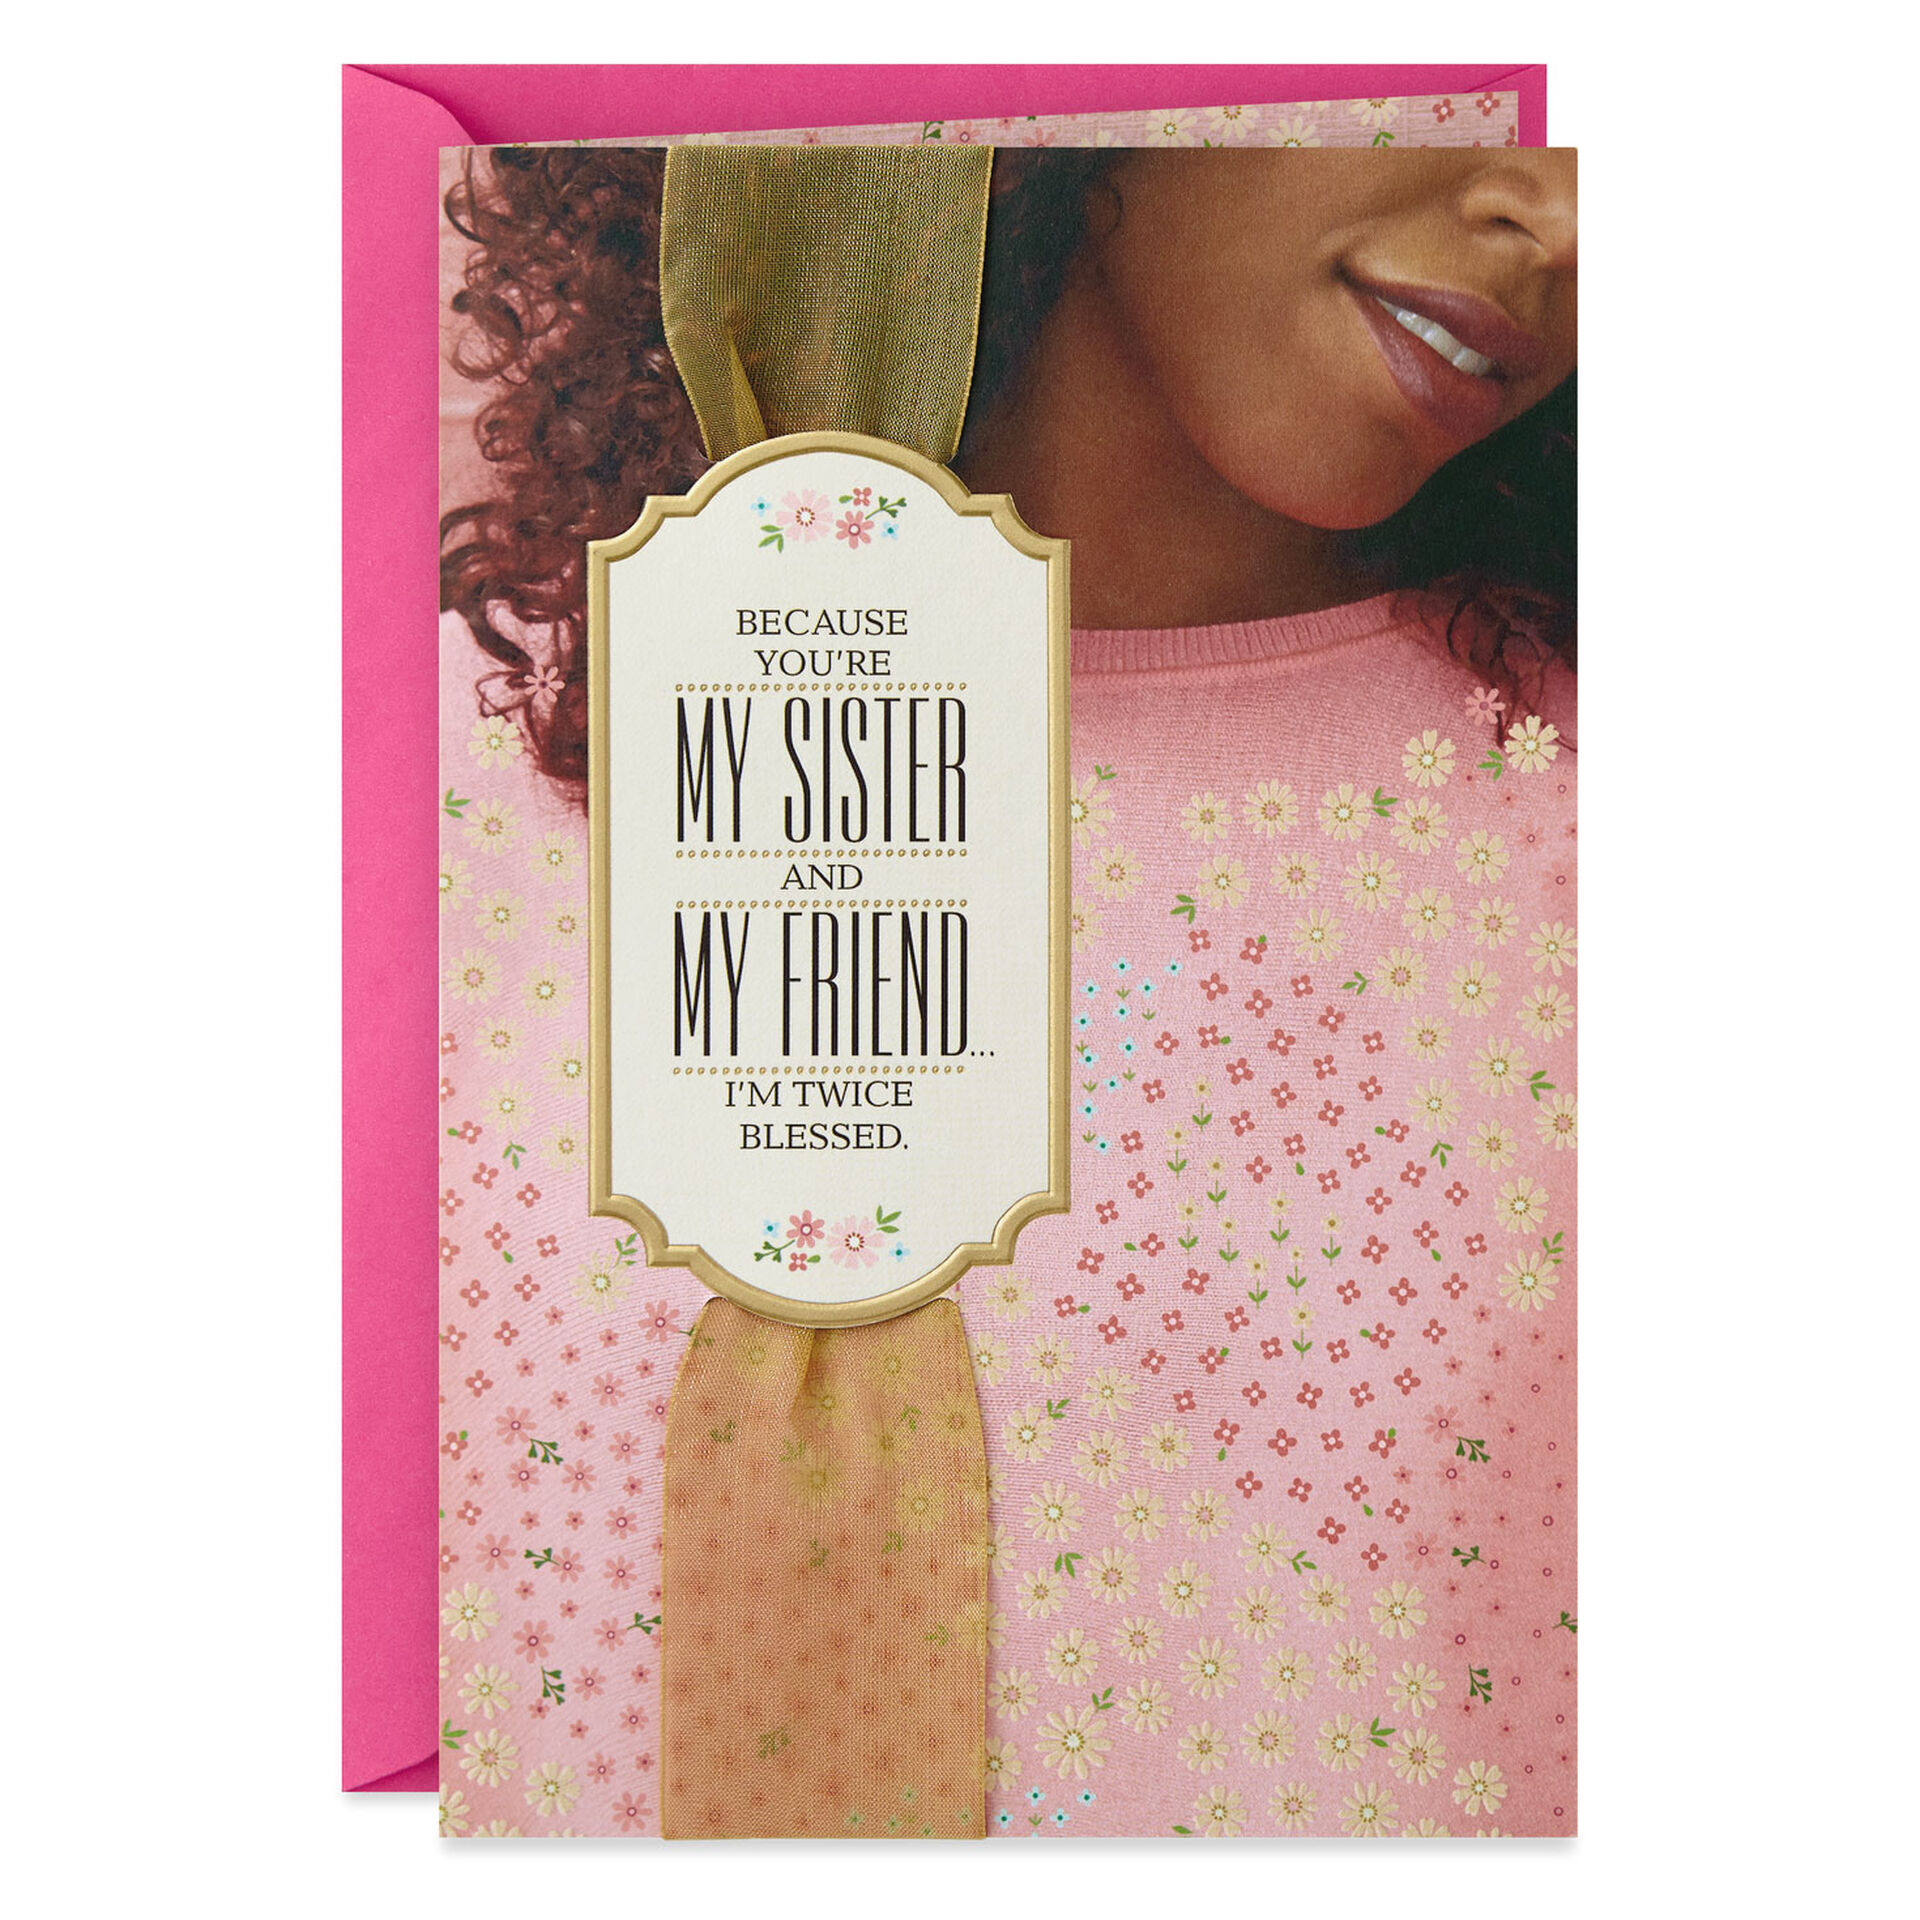 My-Sister-My-Friend-Twice-Blessed-Birthday-Card_499MHB1774_01